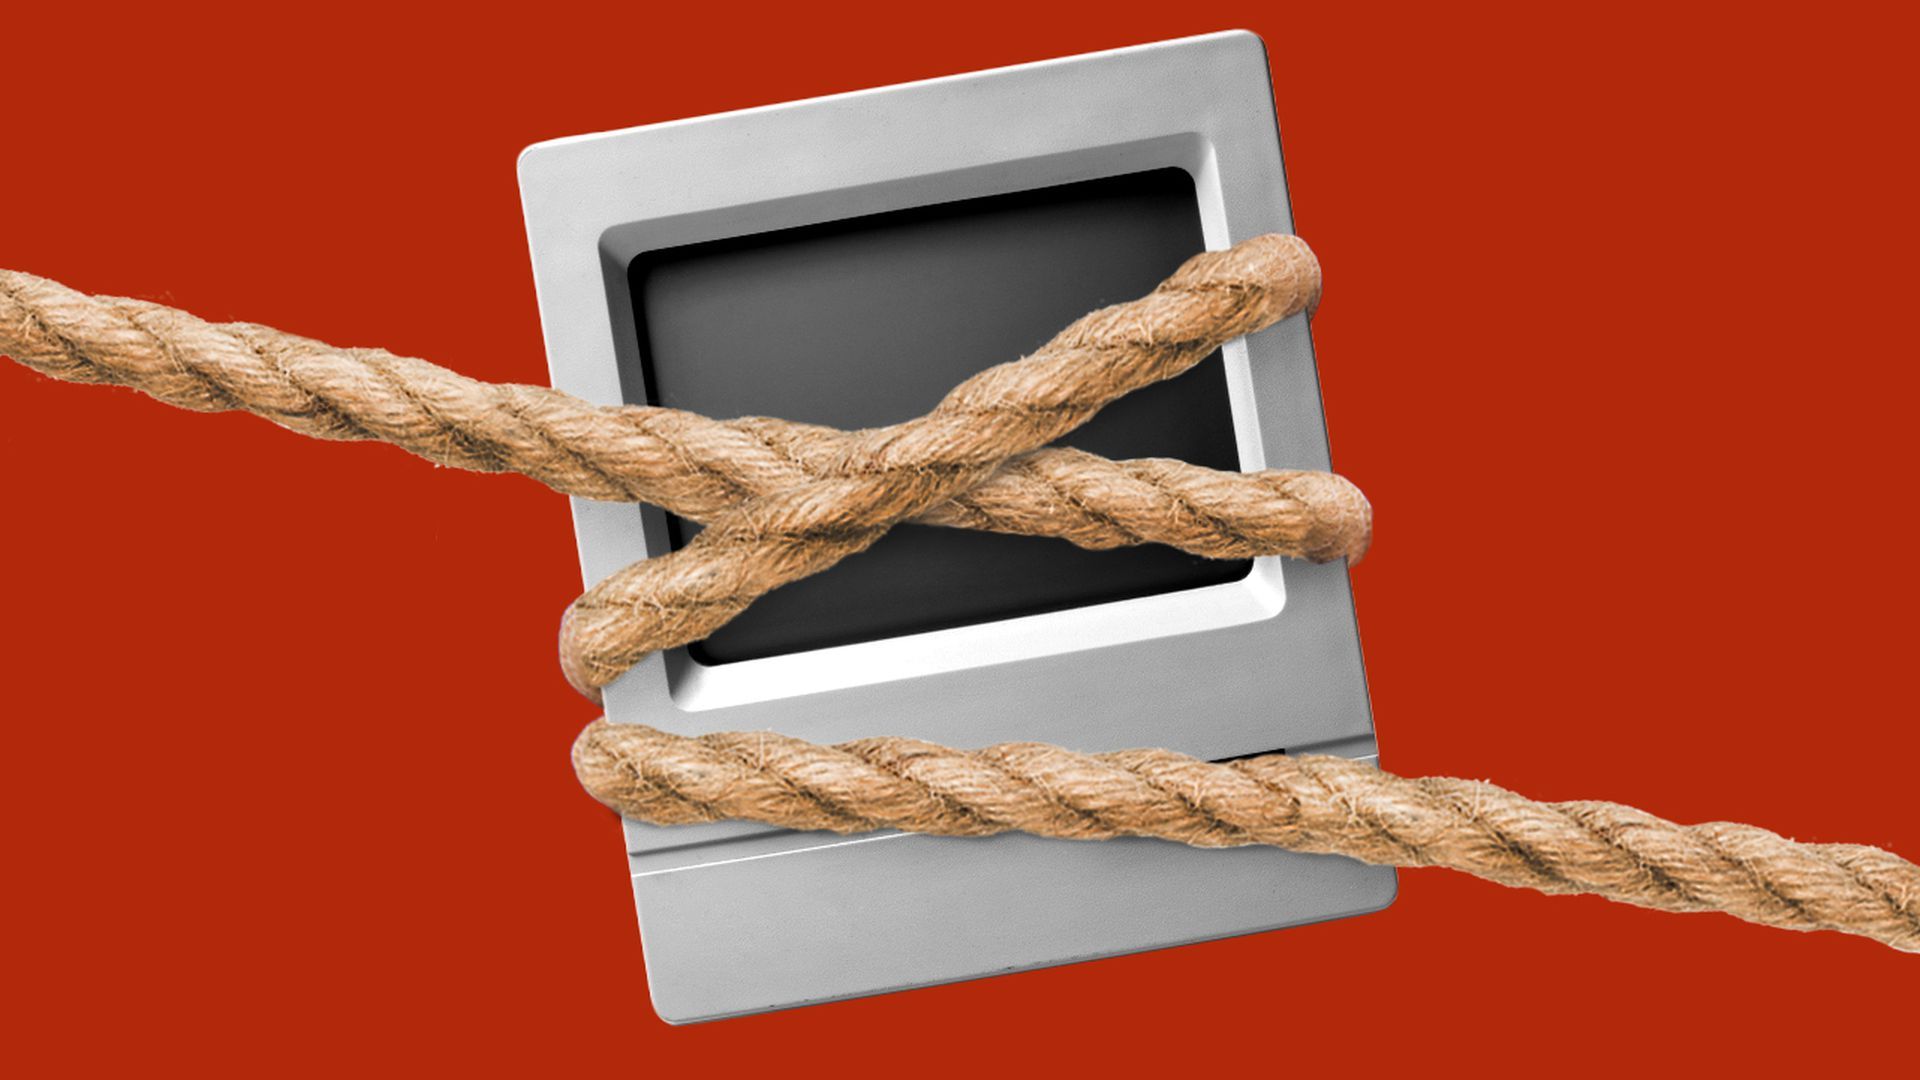 Illustration of a computer wrapped in ropes.